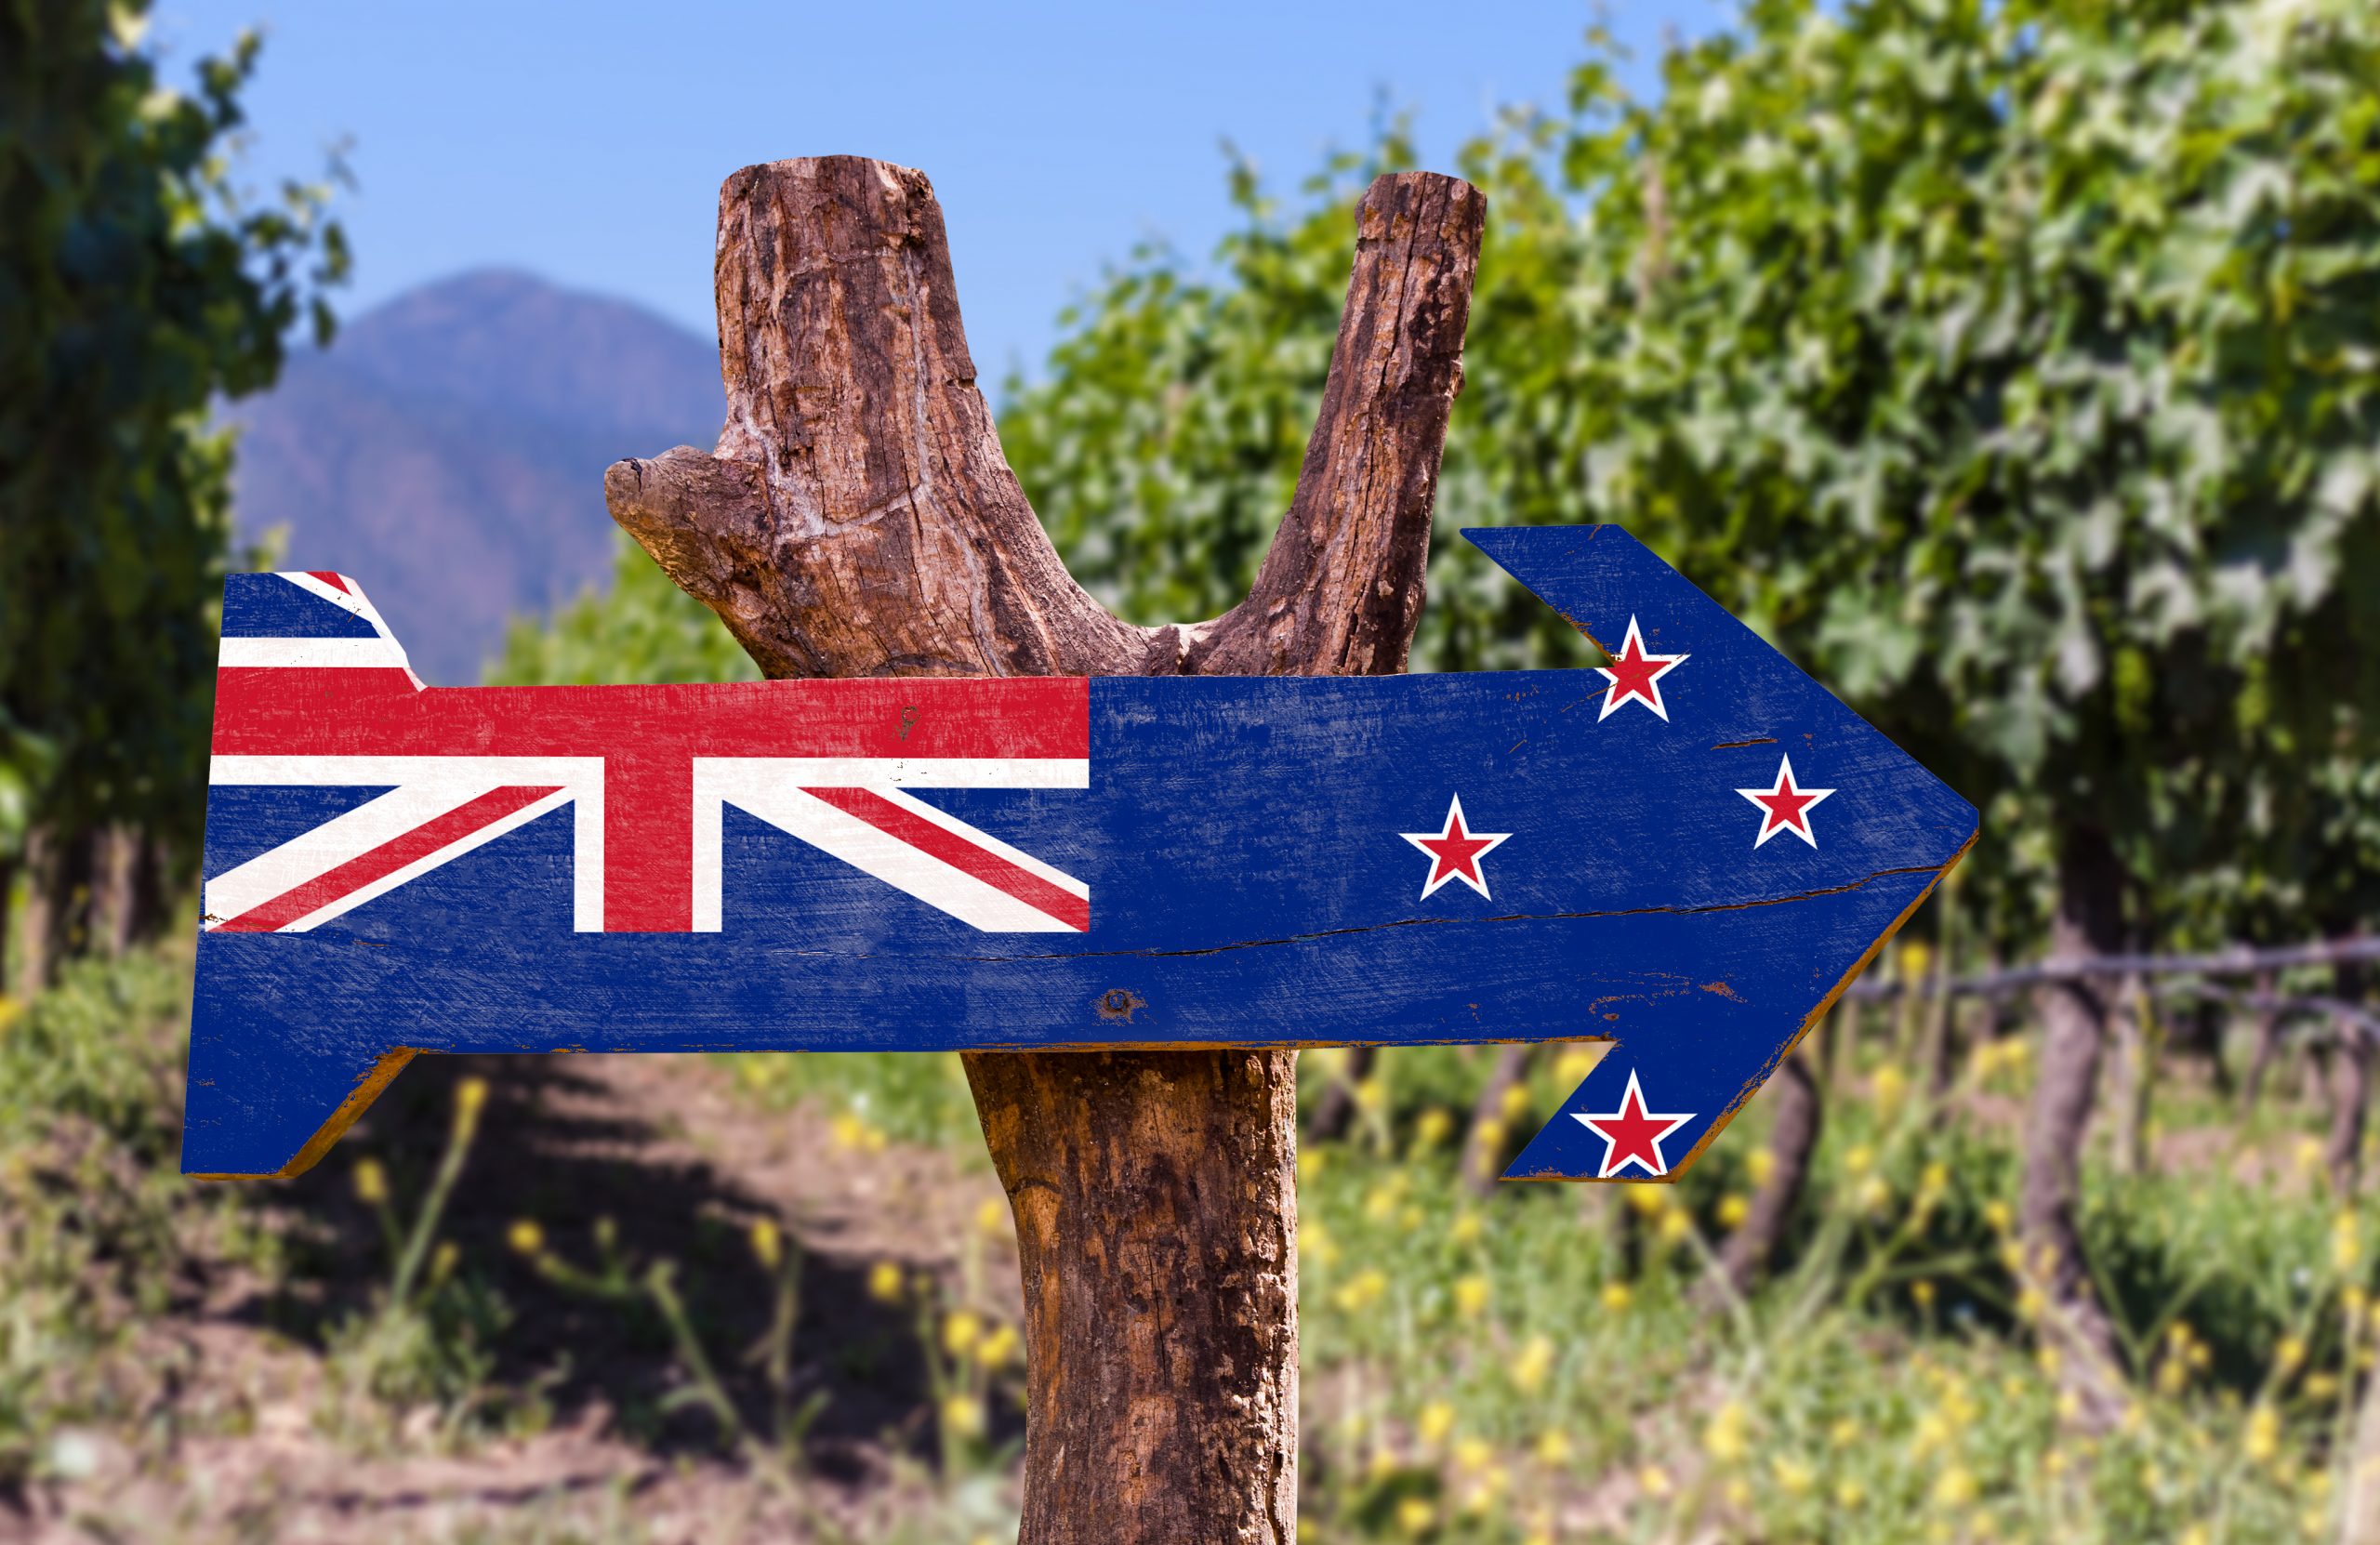 New Zealand wines in high demand despite extreme shortages